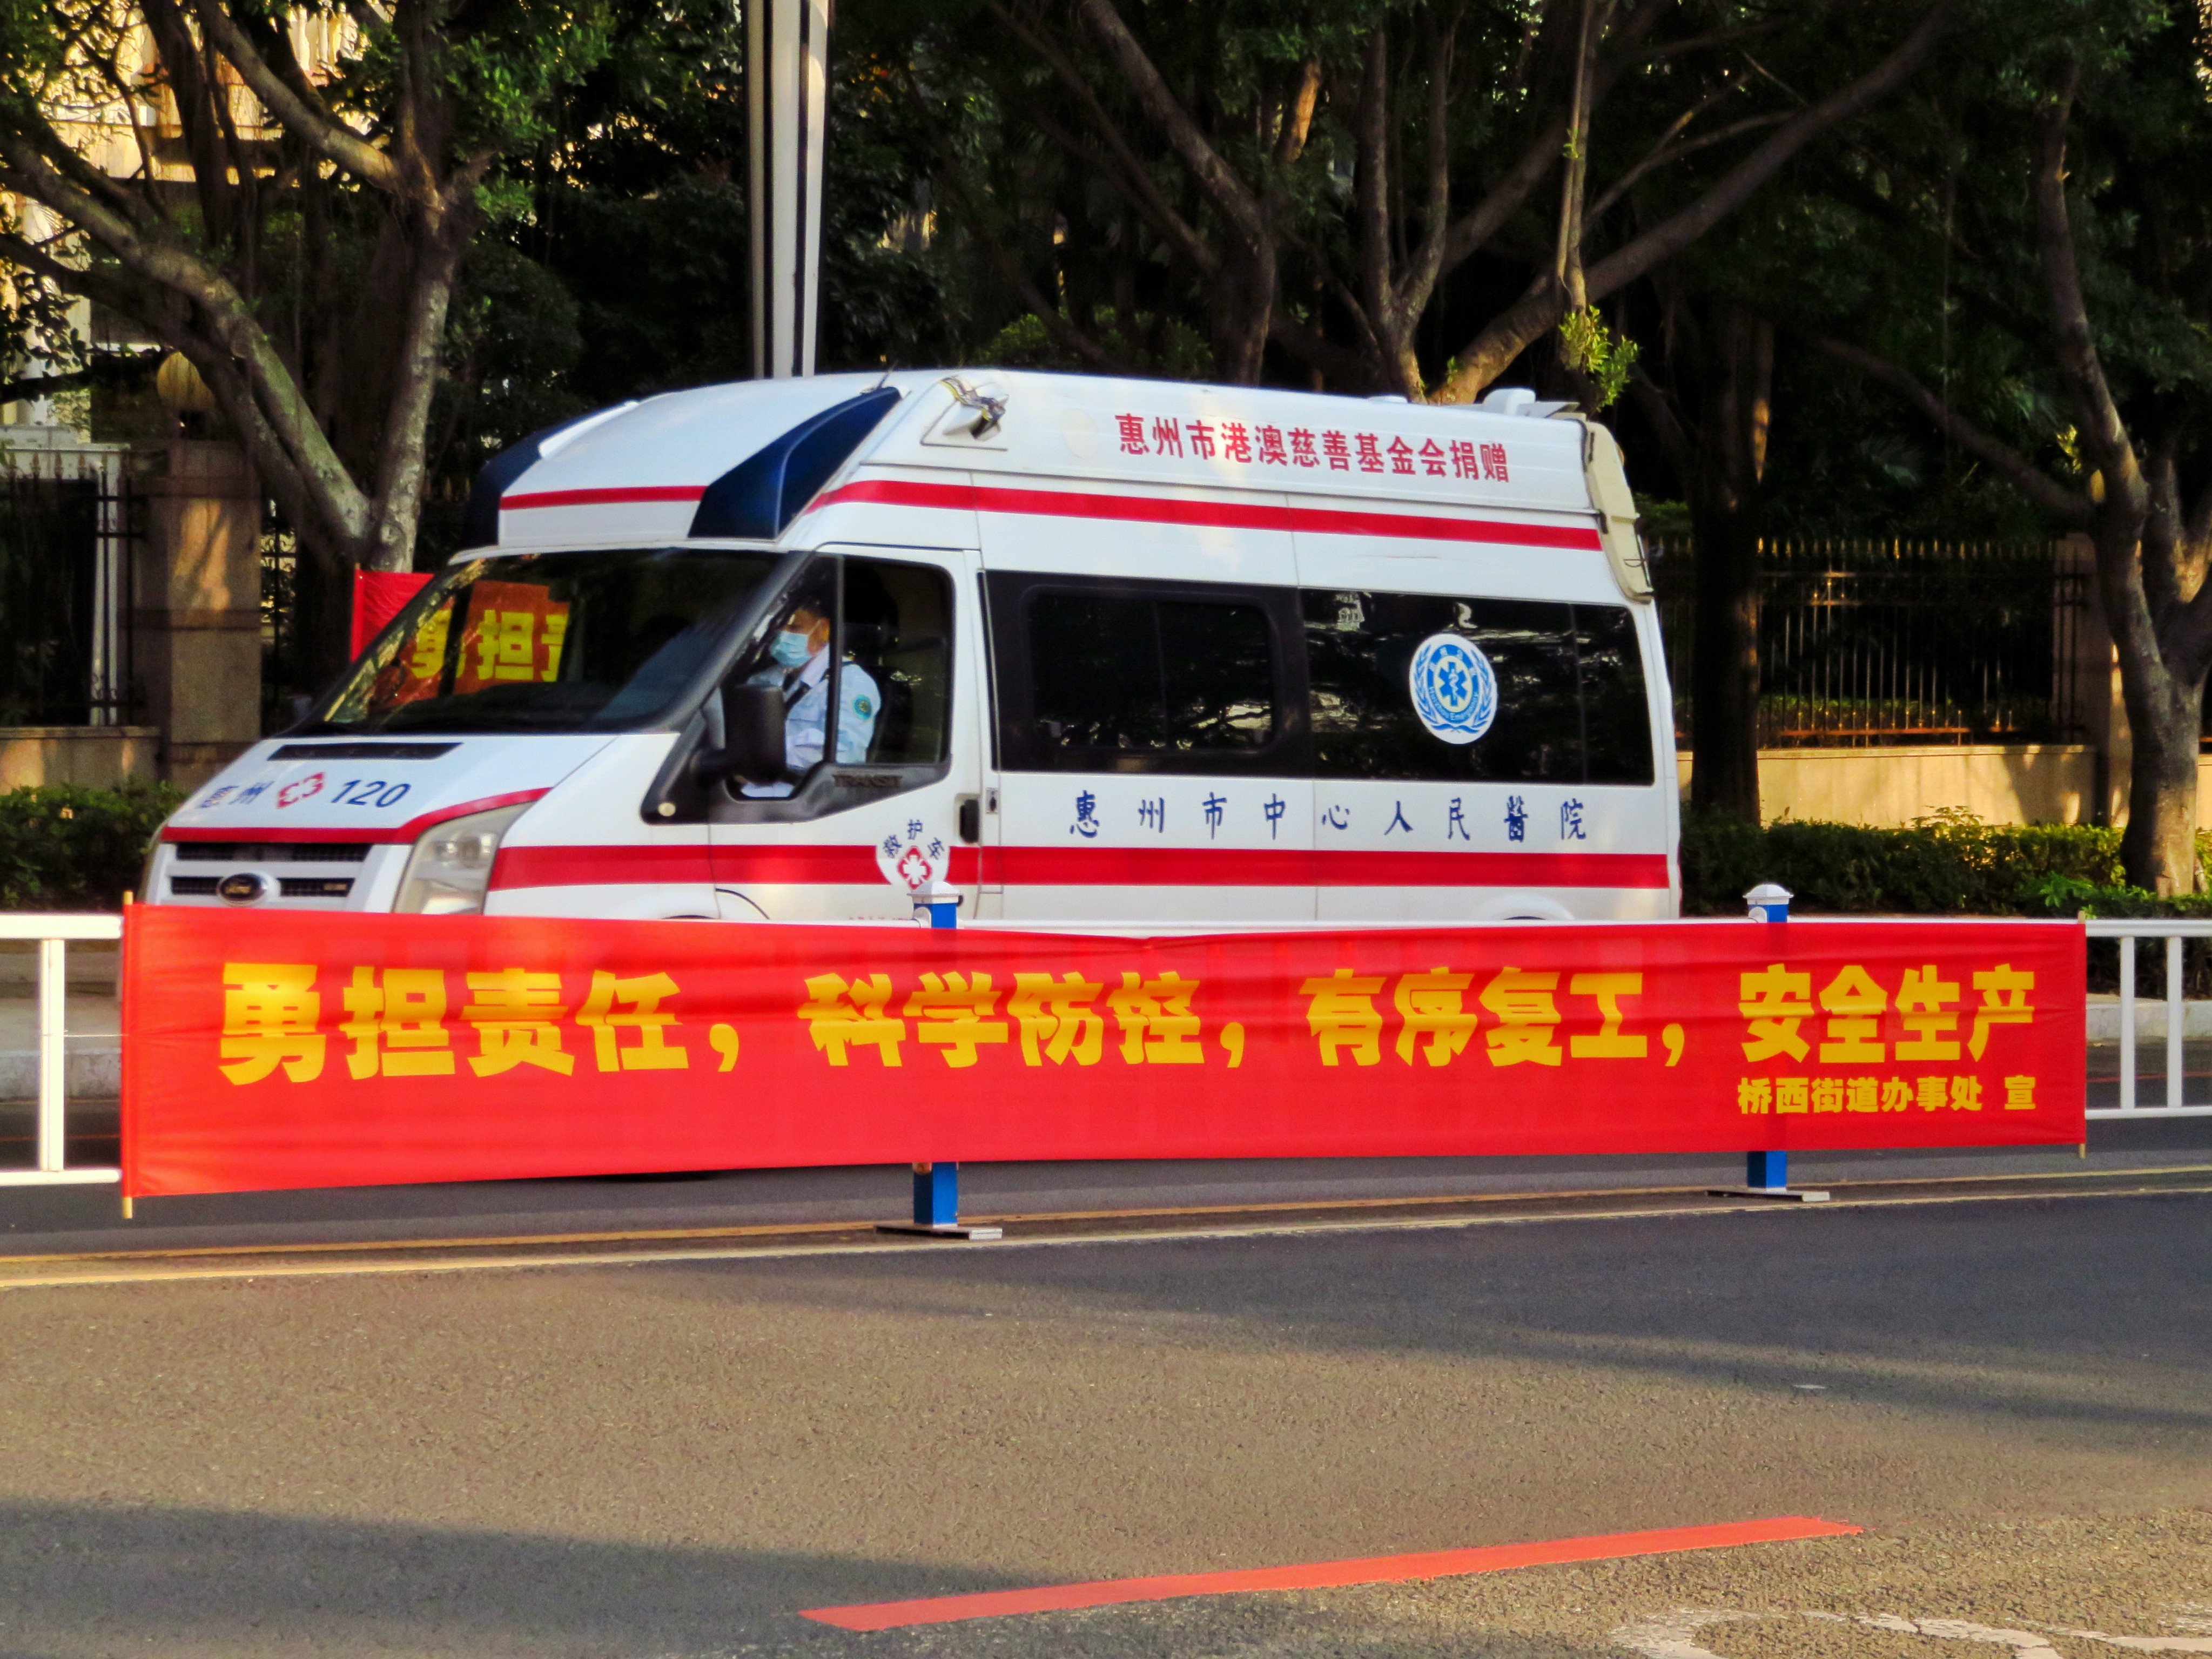 Mainland Chinese ambulances will transfer patients from across the border and Macau, as well as Hongkongers, to the financial hub for treatment. Photo: Shutterstock